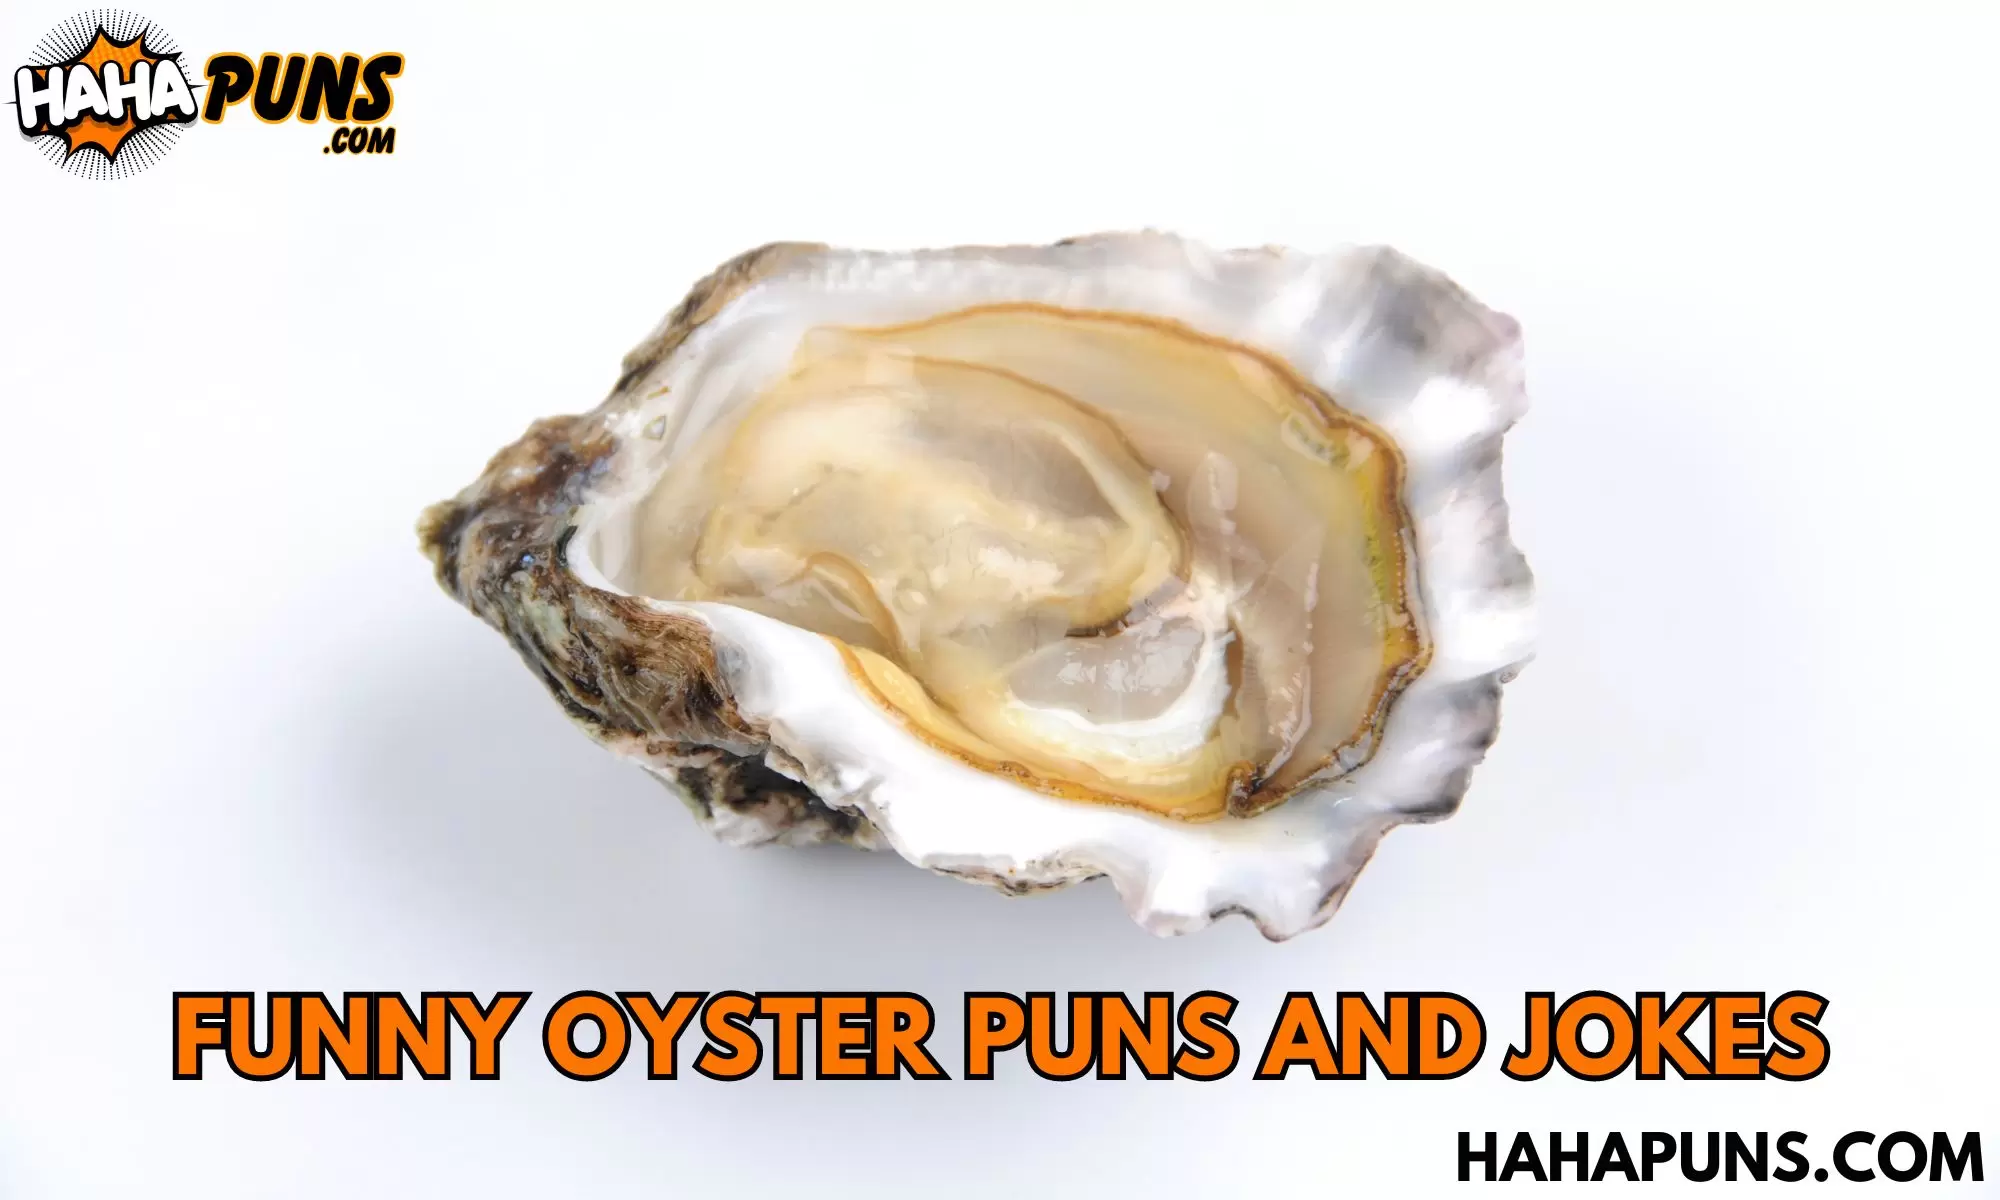 Funny Oyster Puns and Jokes